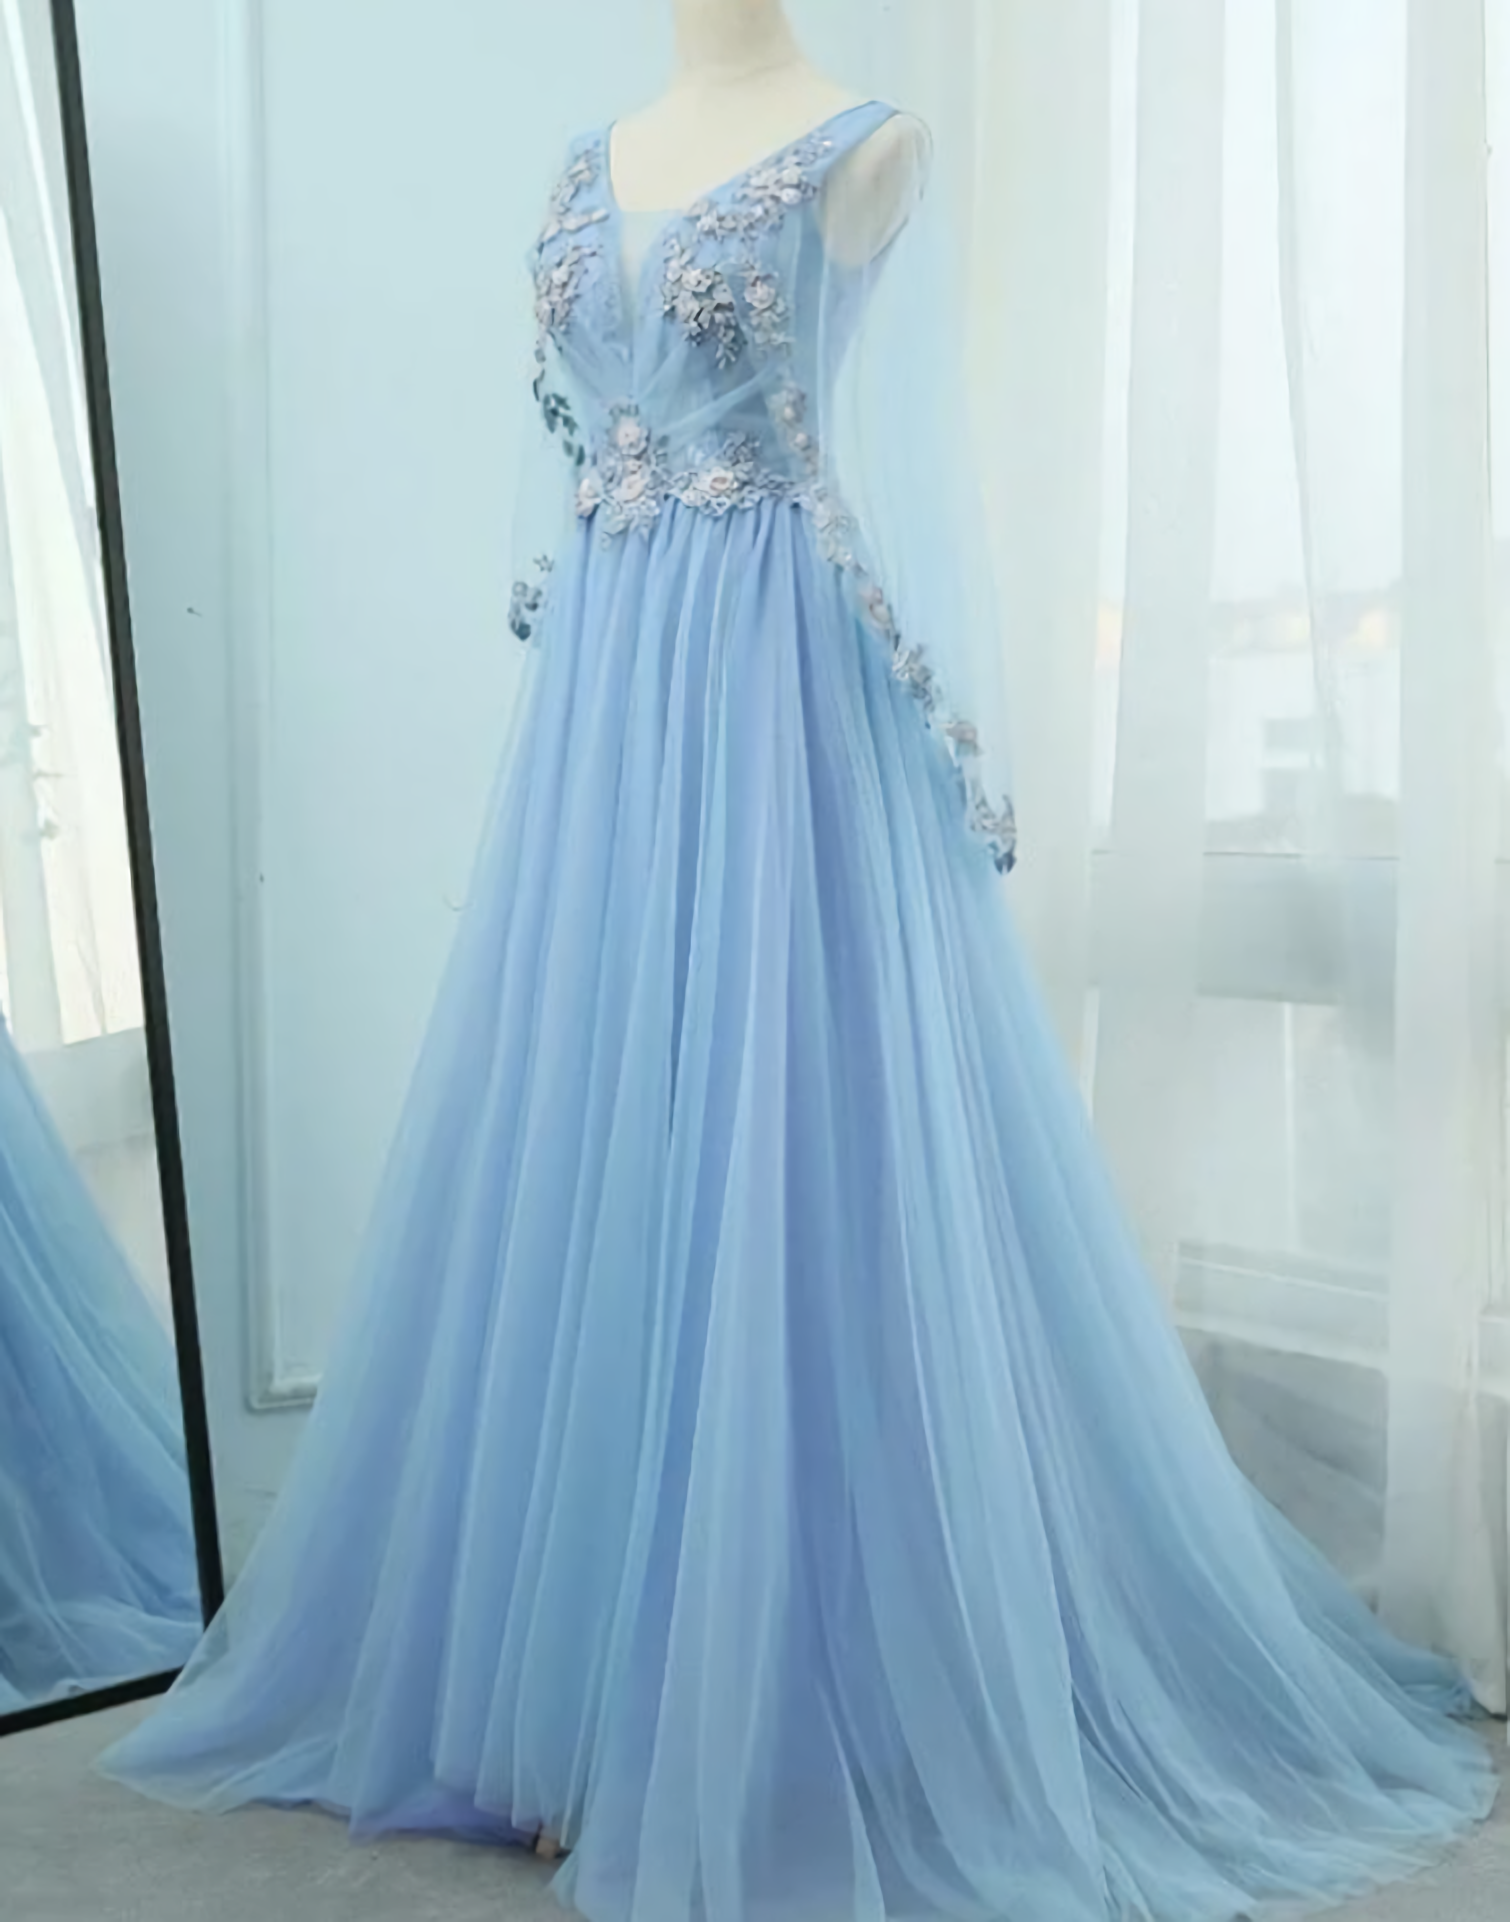 Beautiful Tulle Light Blue Floor Length Prom Dress, New Party Dress